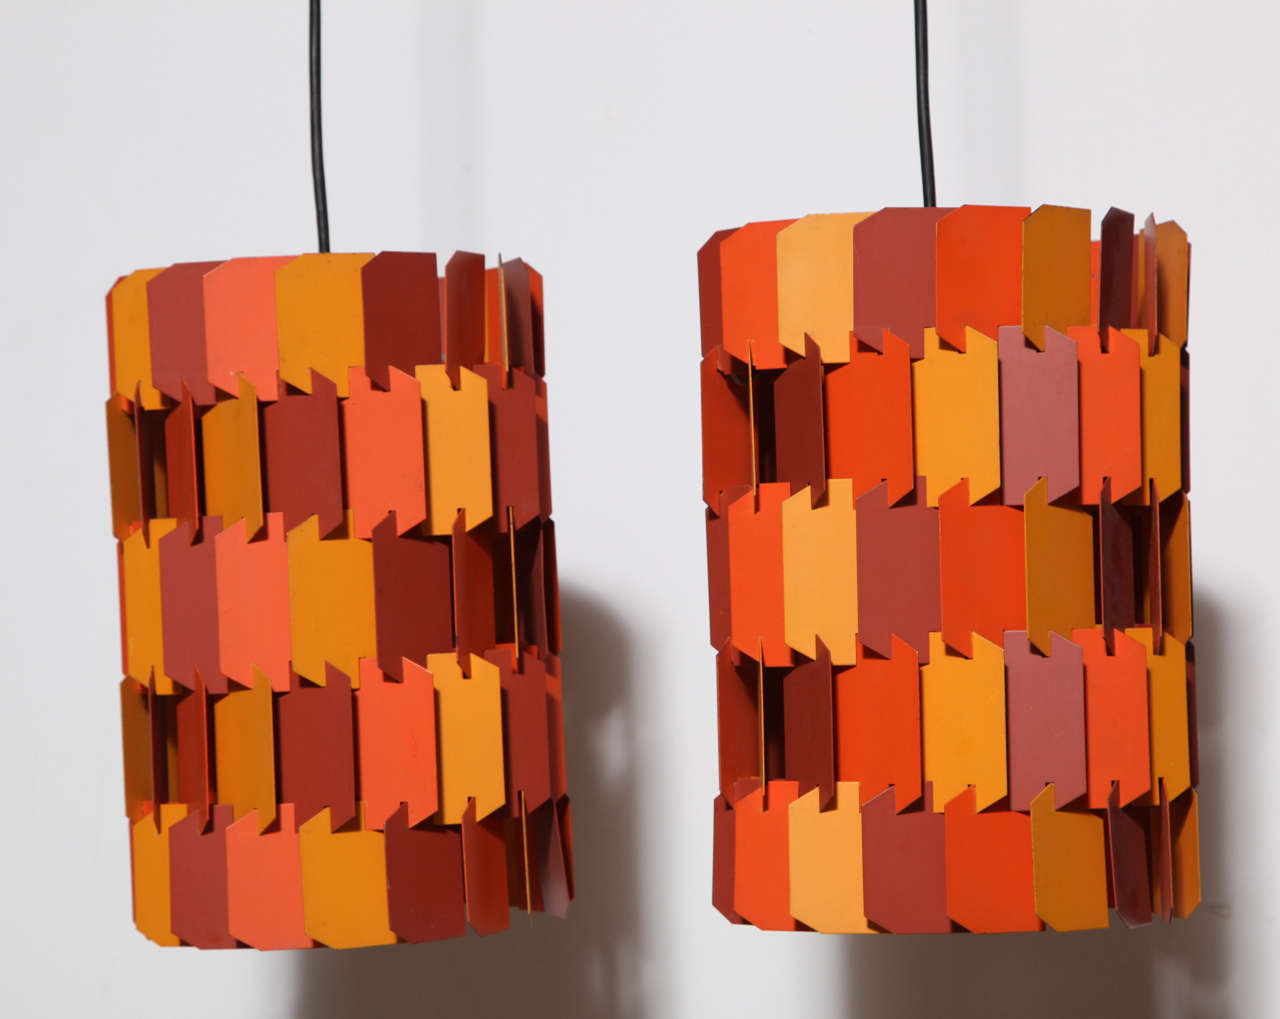 Original Pair of Danish Modern Louis Weisdorf for Lyfa Ballerup Multi Colored Hanging Lamps, early 1970's. Featuring faceted cylindrical forms with castellated Orange, Muted Rose and Pale Mustard enameled Aluminum interlocking Jigsaw style pieces.